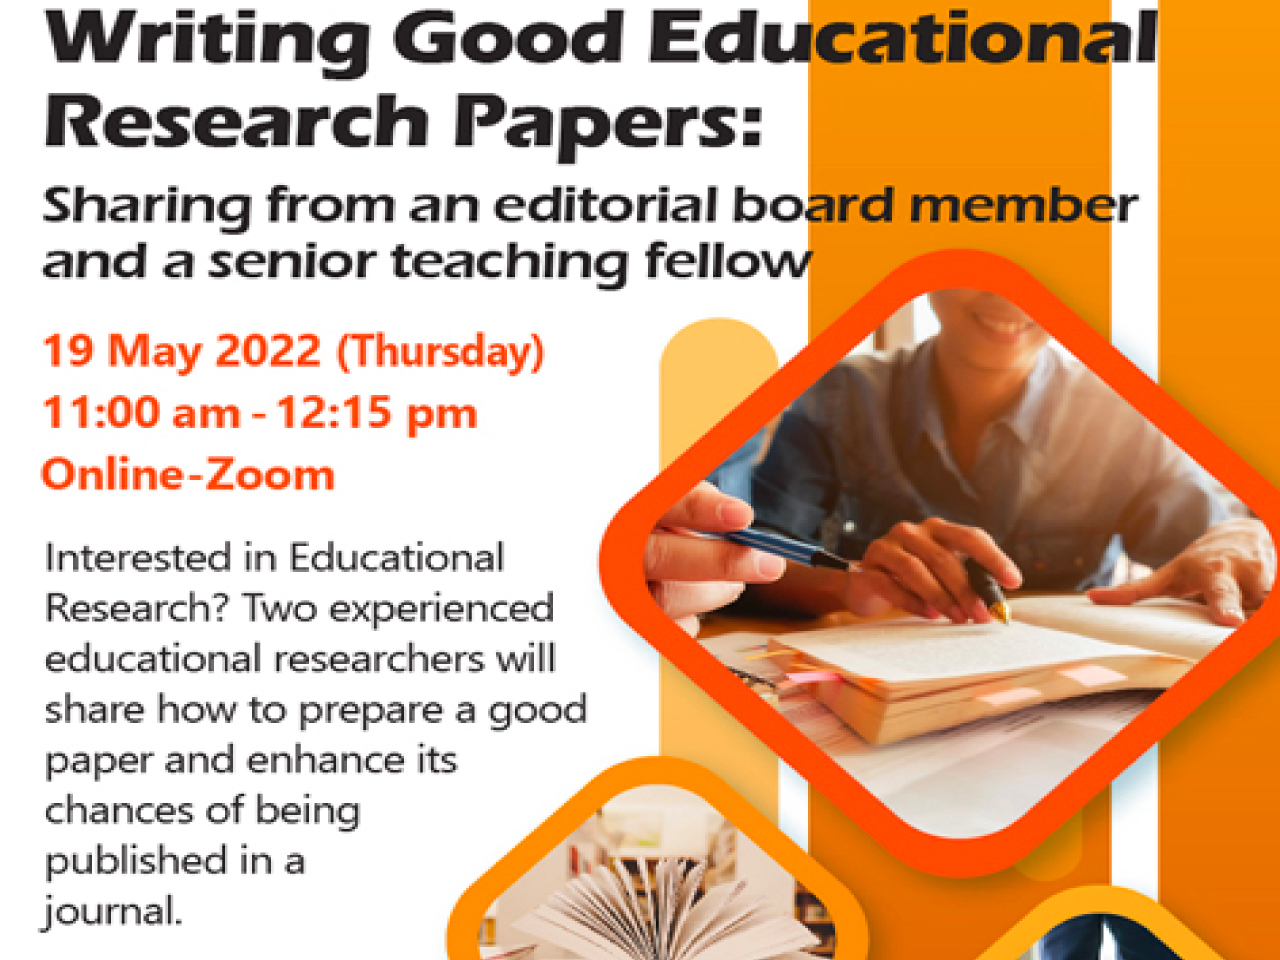 Writing good educational research papers: Sharing from an editorial board member and a senior teaching fellow